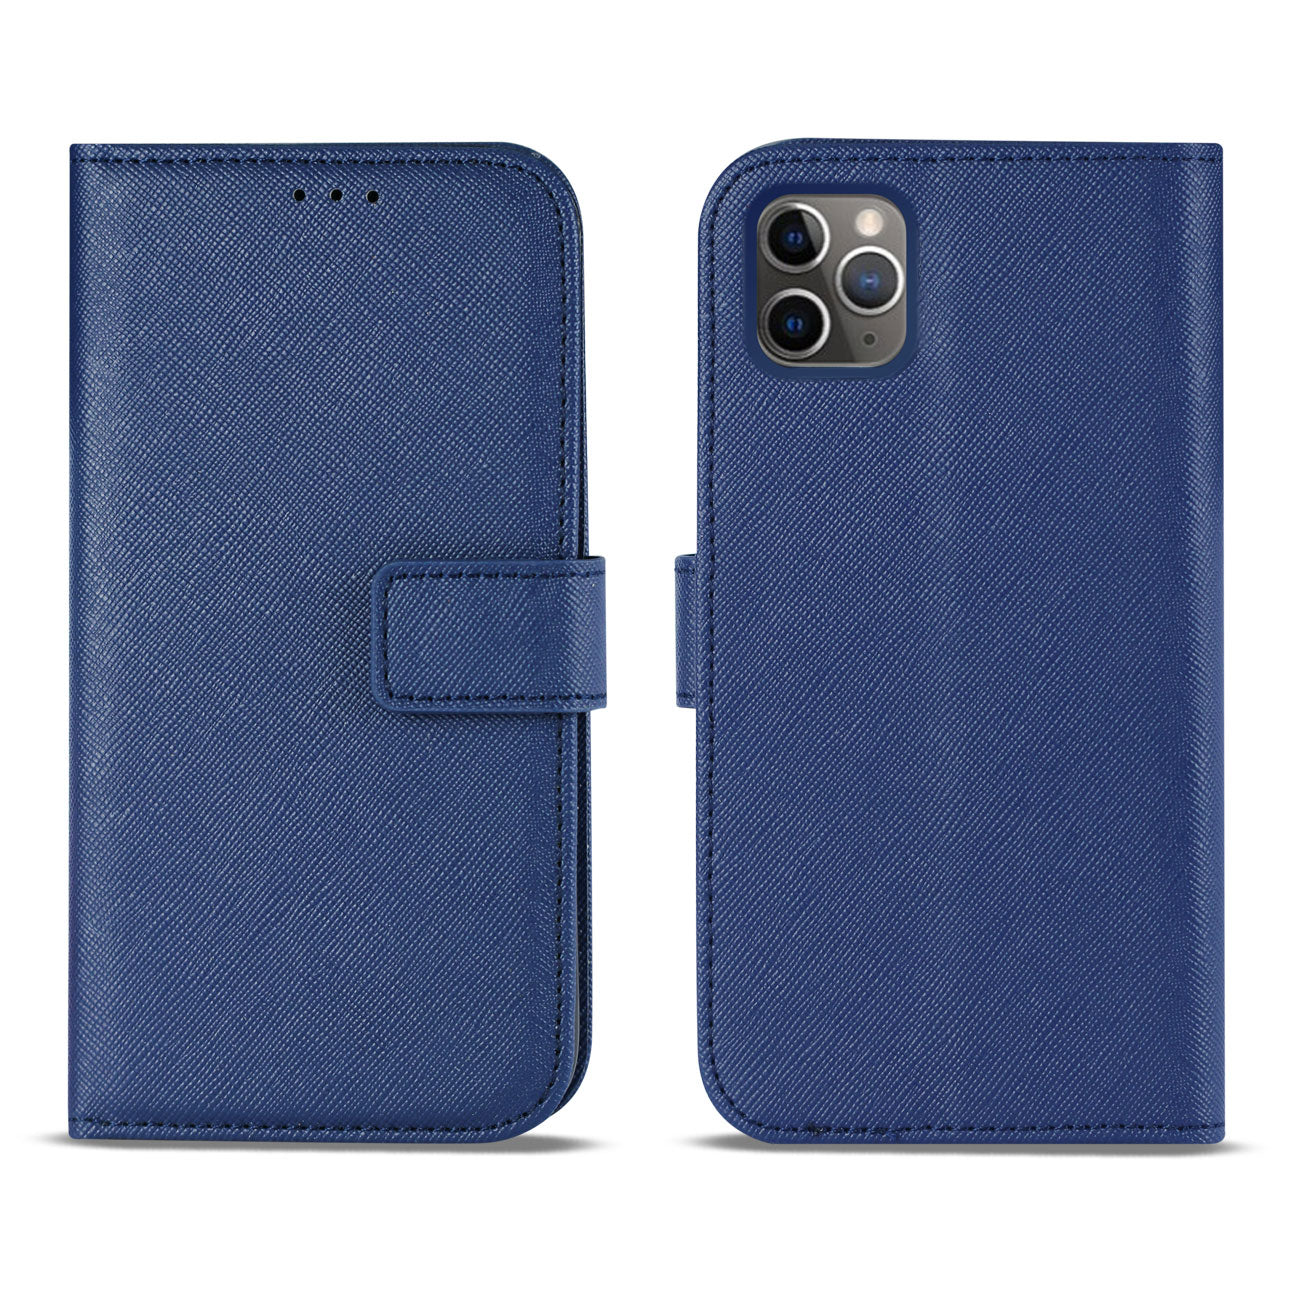 Wallet Case 3 in 1 Apple iPhone 11 Pro Max Blue Color